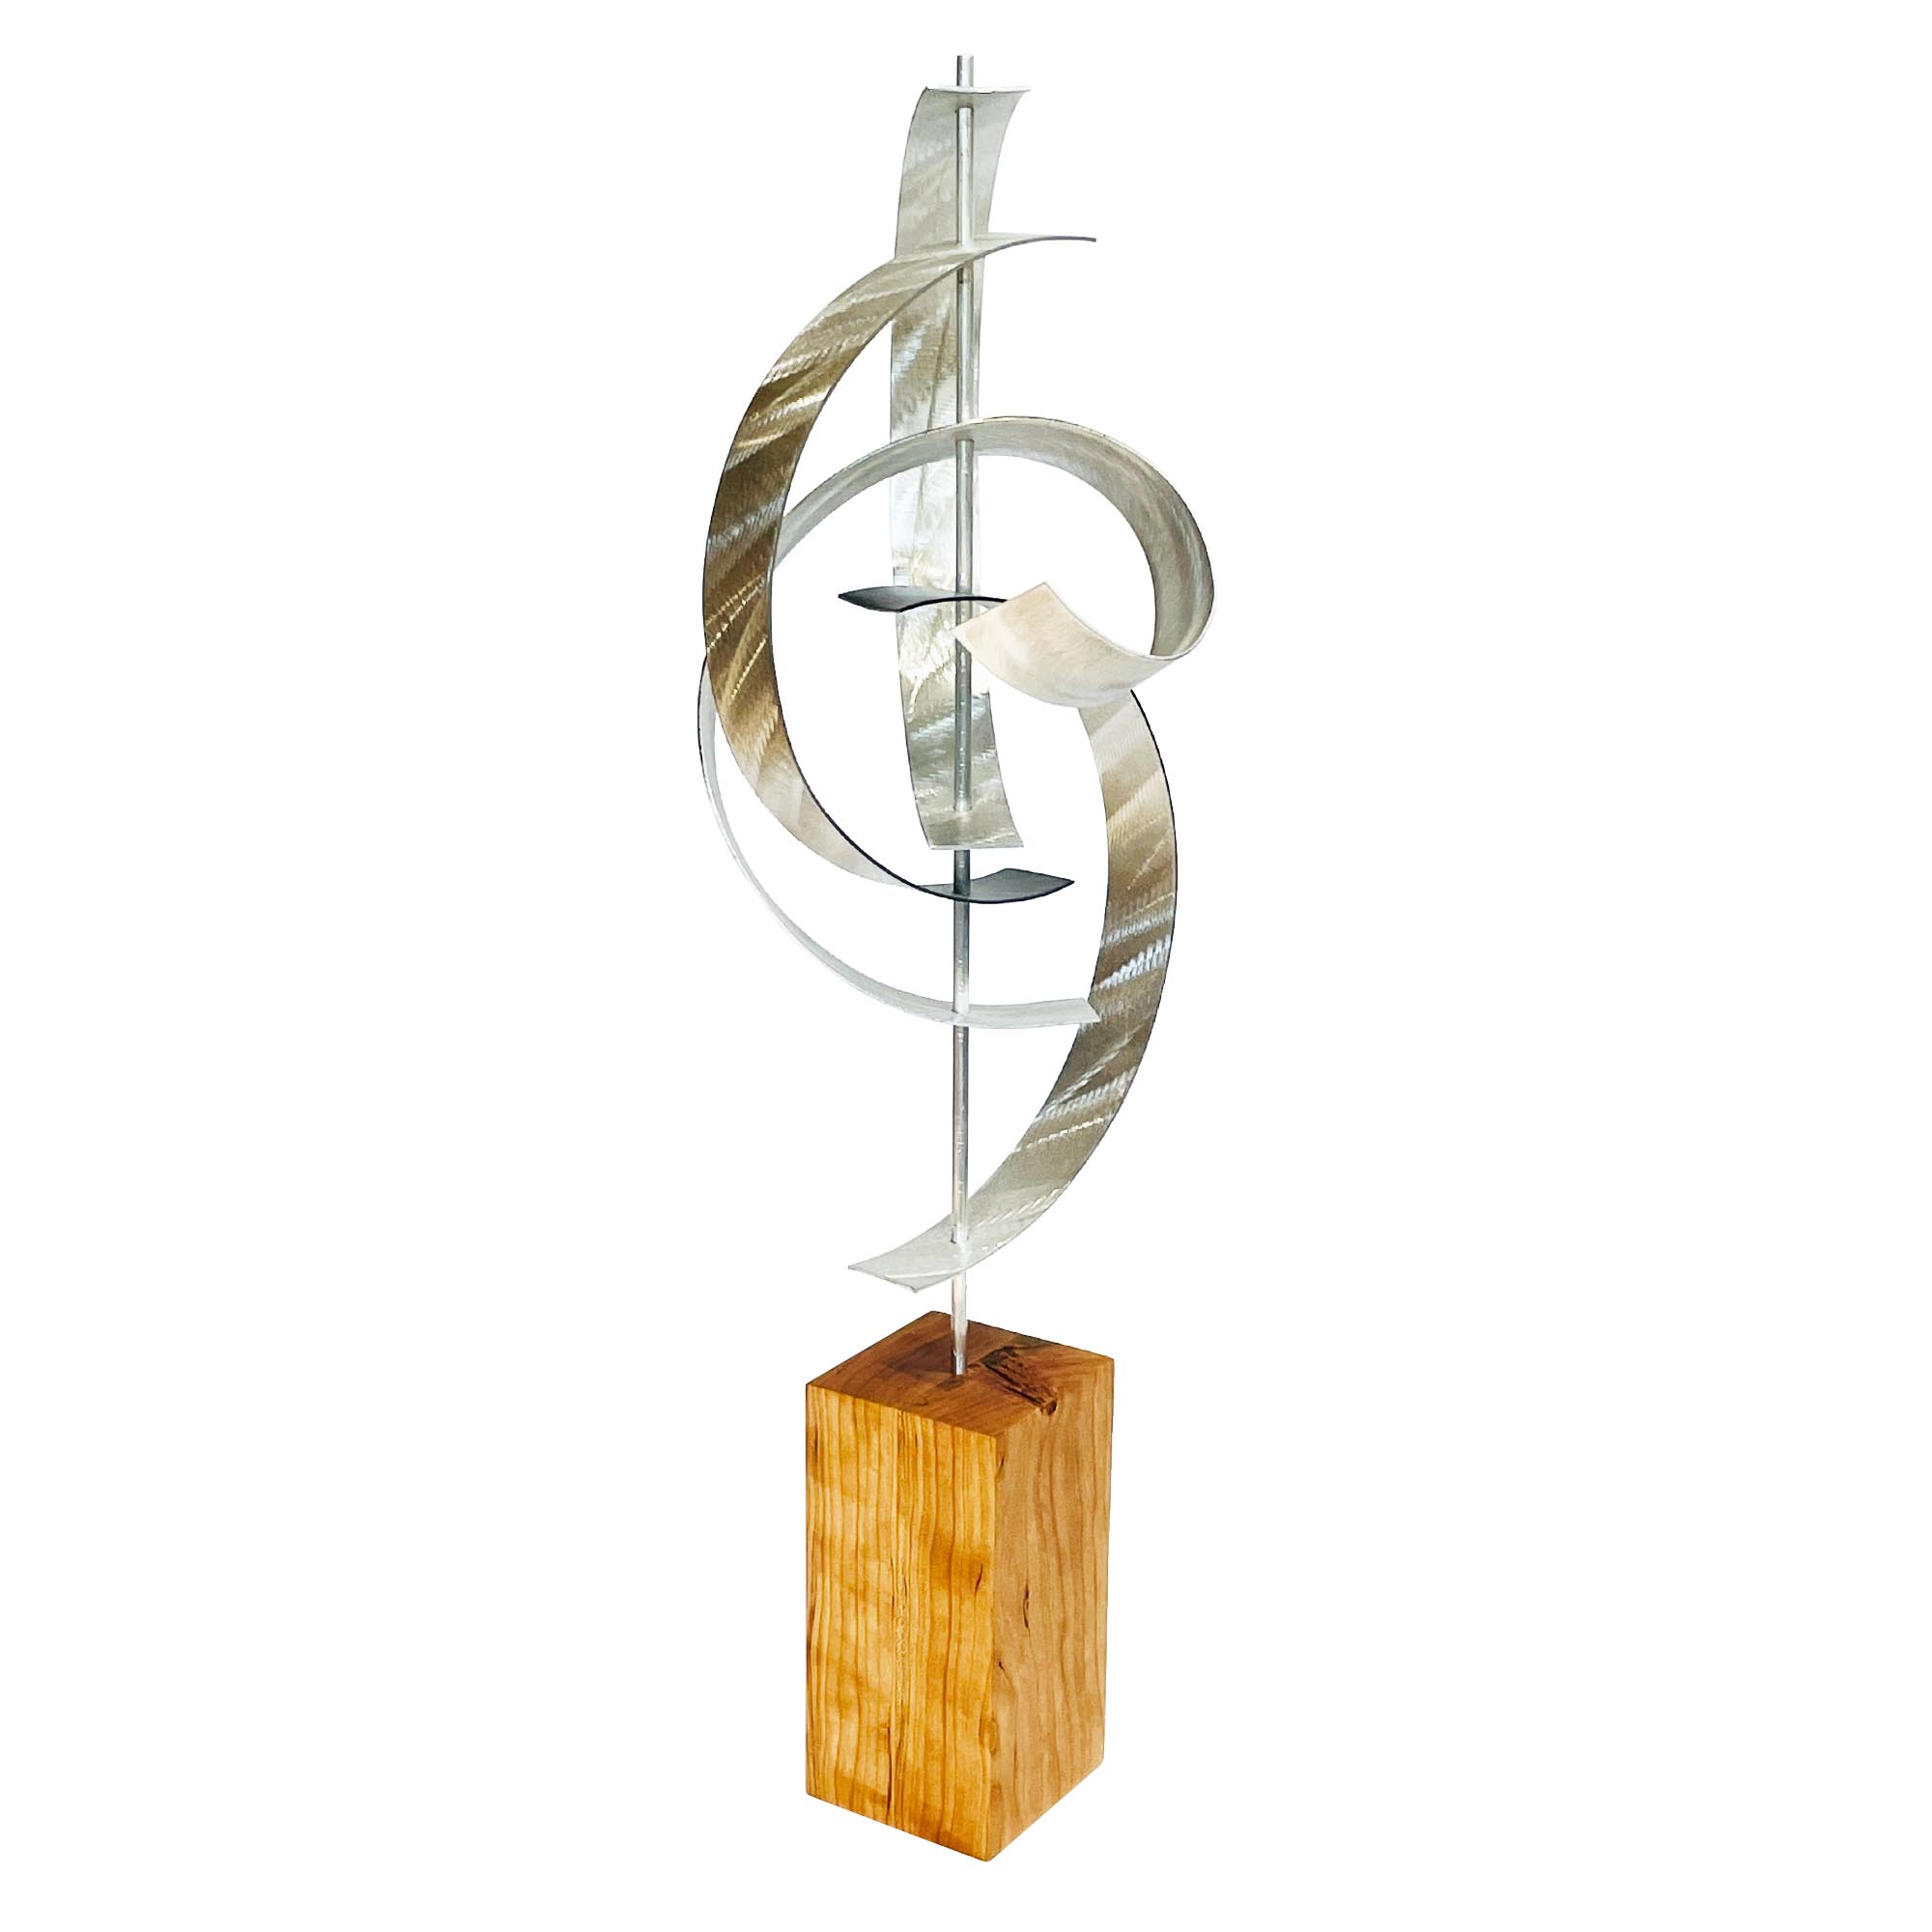 Wind v2 Cherry by Jackson Wright - Abstract Metal Sculpture, Kinetic Sculpture - Image 2